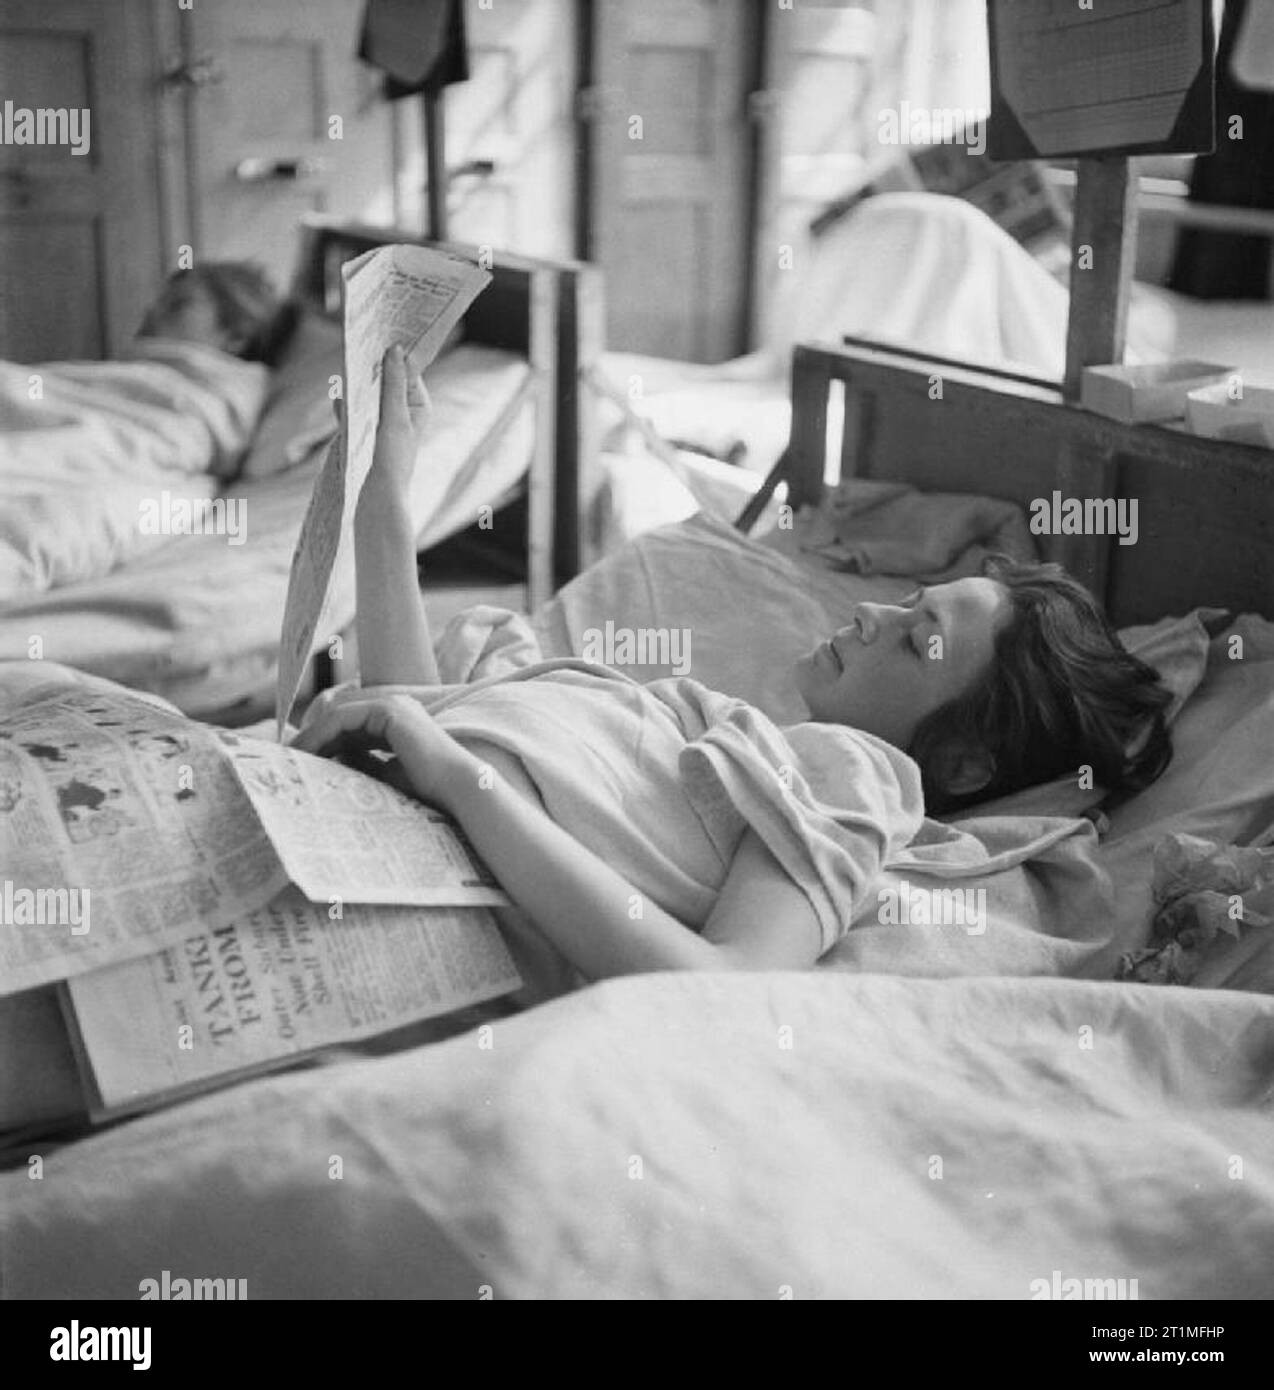 The Liberation of Bergen-belsen Concentration Camp, May 1945 For the first time in four years, a young Czech girl and former camp inmate is able to read a newspaper while recovering in the hospital set up in Hohne Military Barracks nearby. Stock Photo